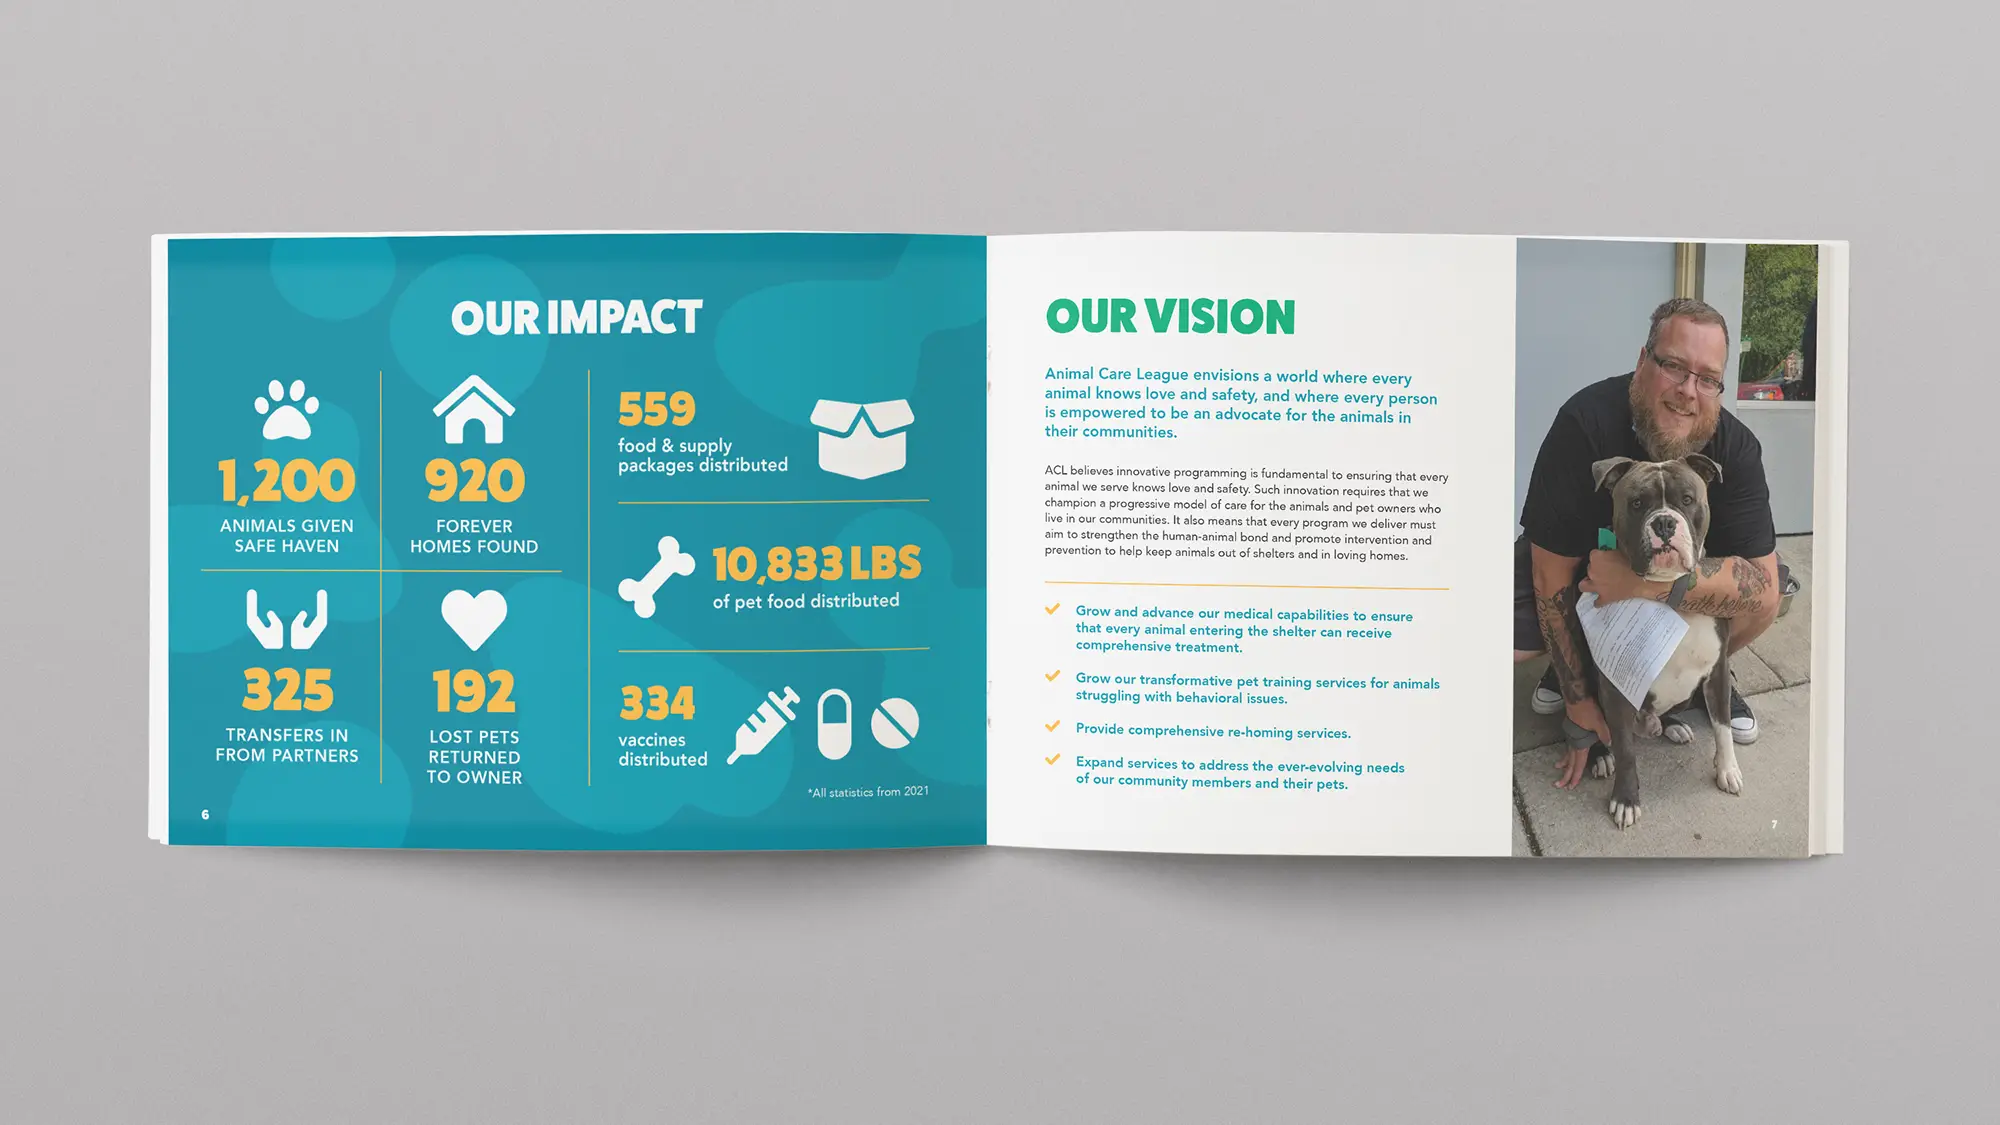 A successful capital campaign can use a brochure, like Animal Care League's infographic spread design on the left showing Animal Care League's brochure mockup showing impact and a page on the right dedicated to their Vision.